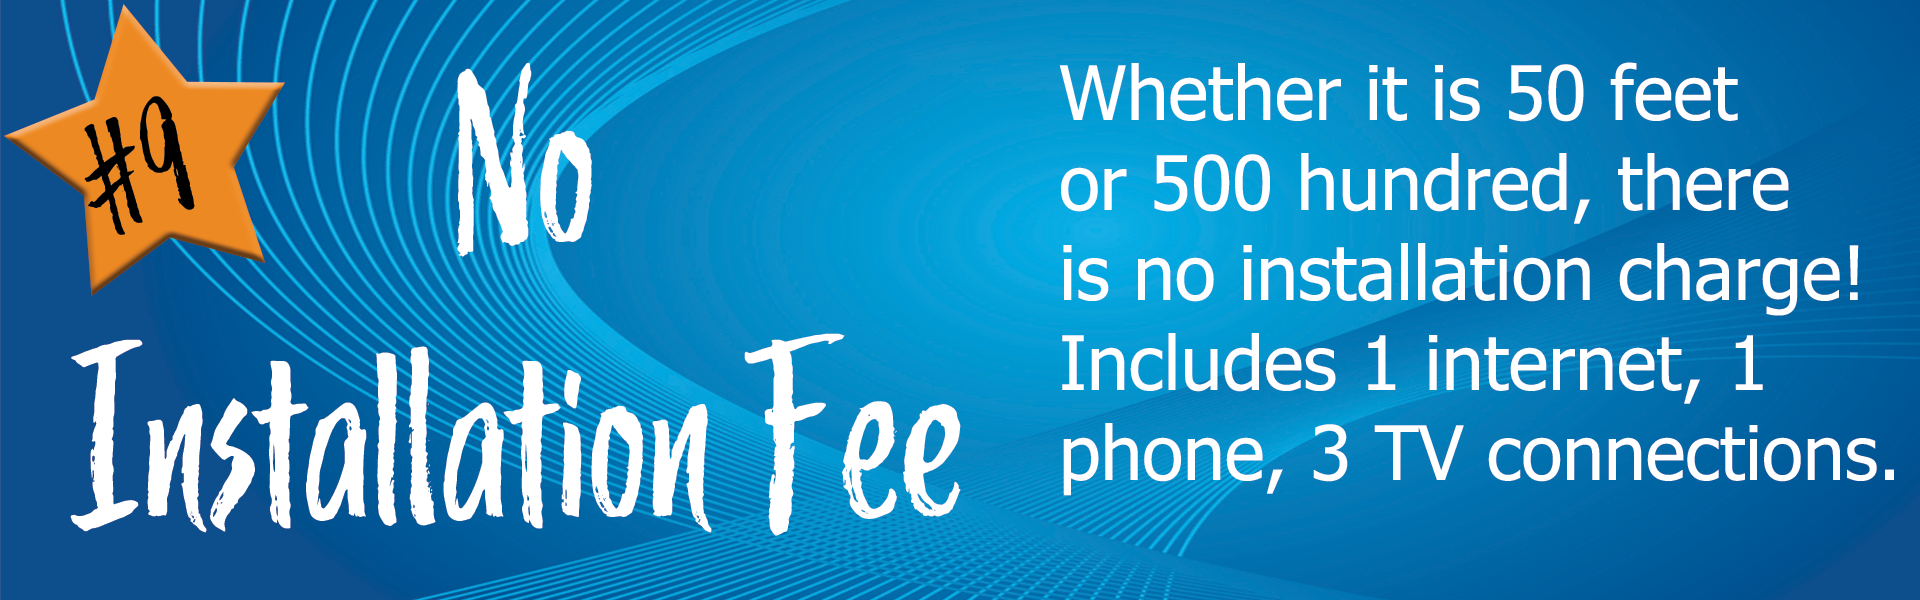 number 9 reason to connect is no installation fee